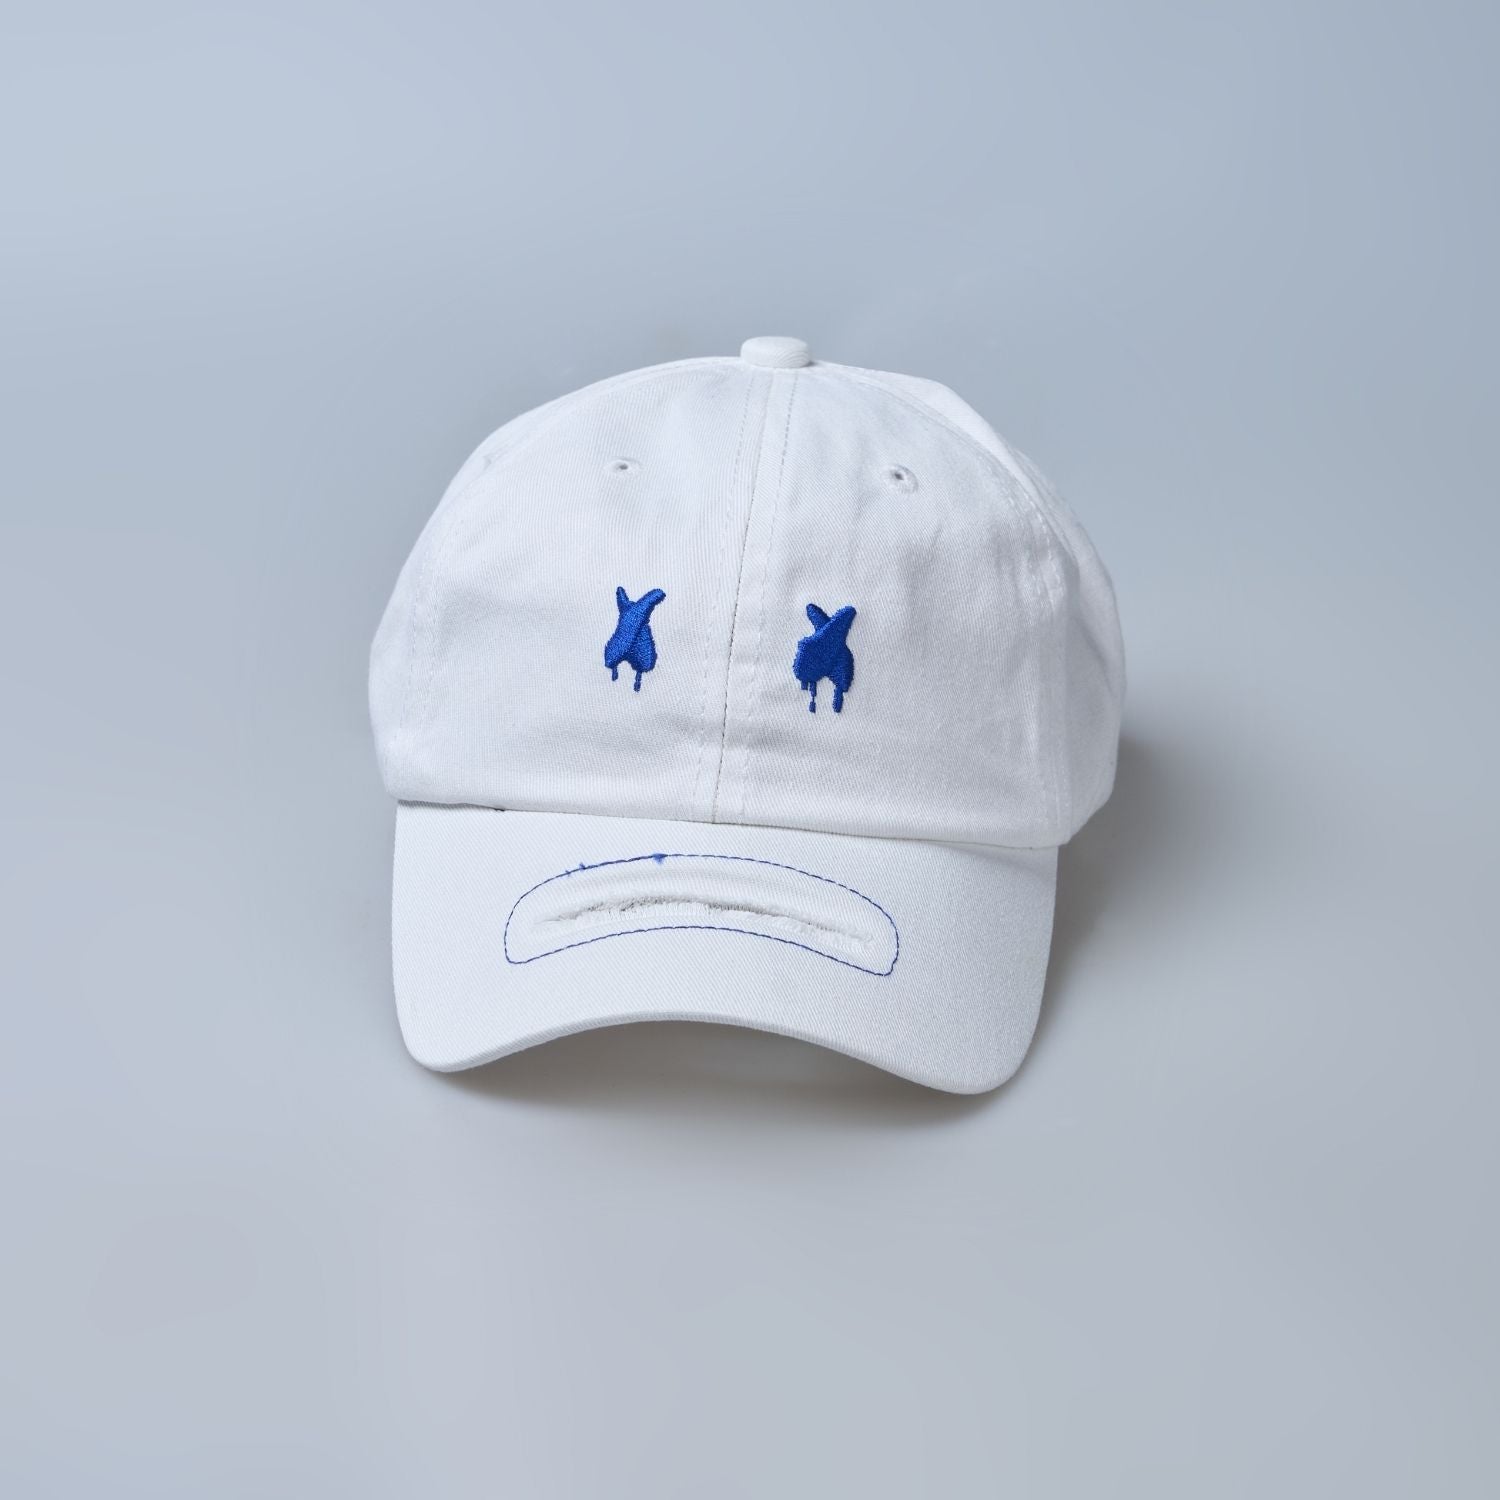 white colored, wide brim cap for men with adjustable strap, front view.